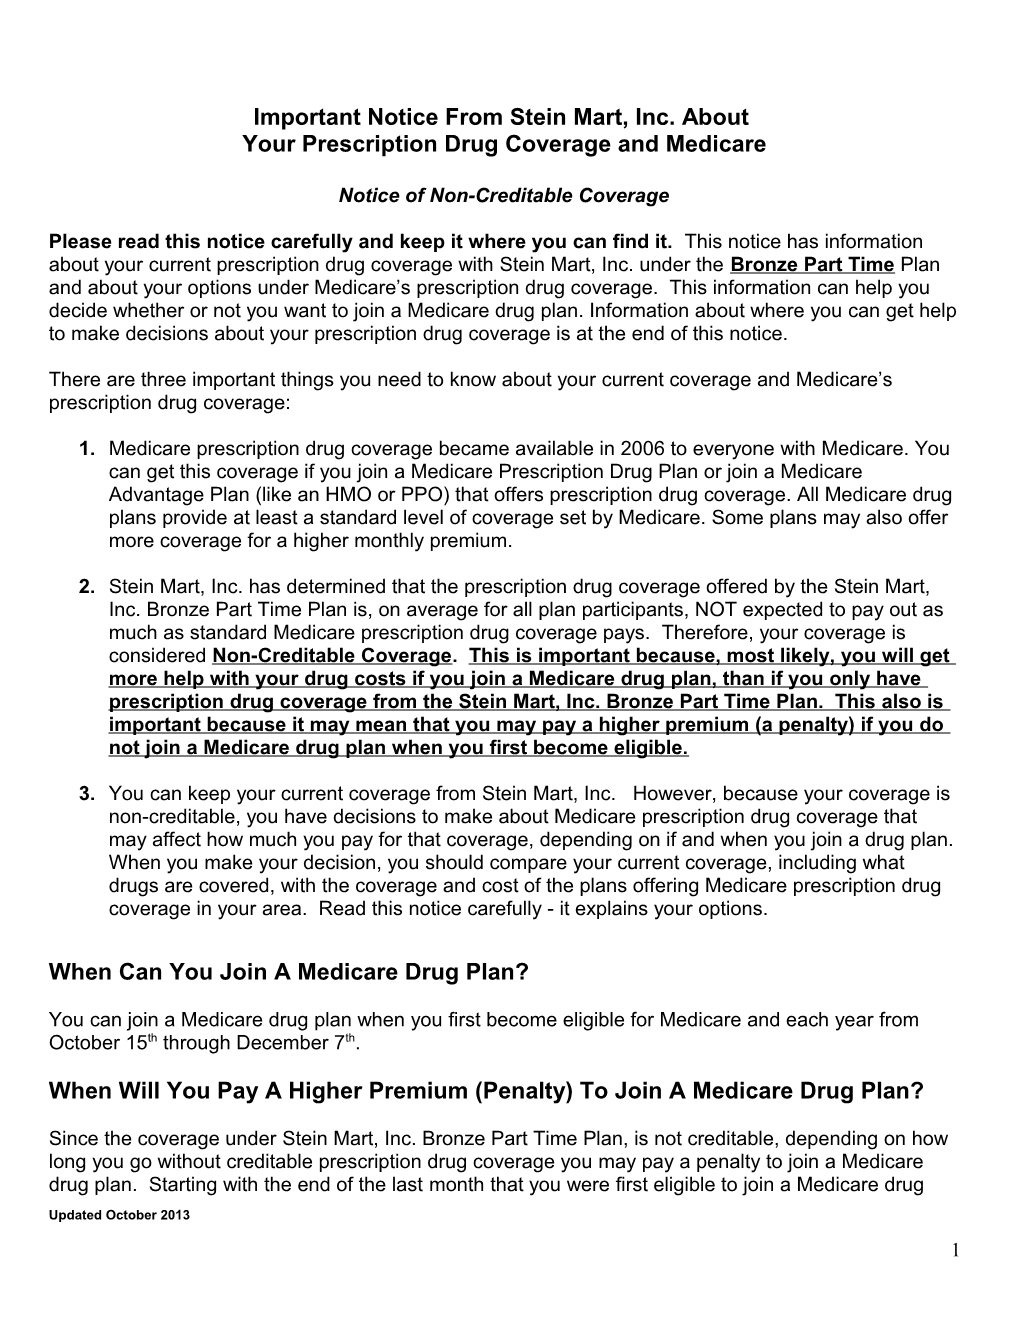 Medicare Part D Notice - Non-Creditable Coverage For The Part-Time Bronze Plan